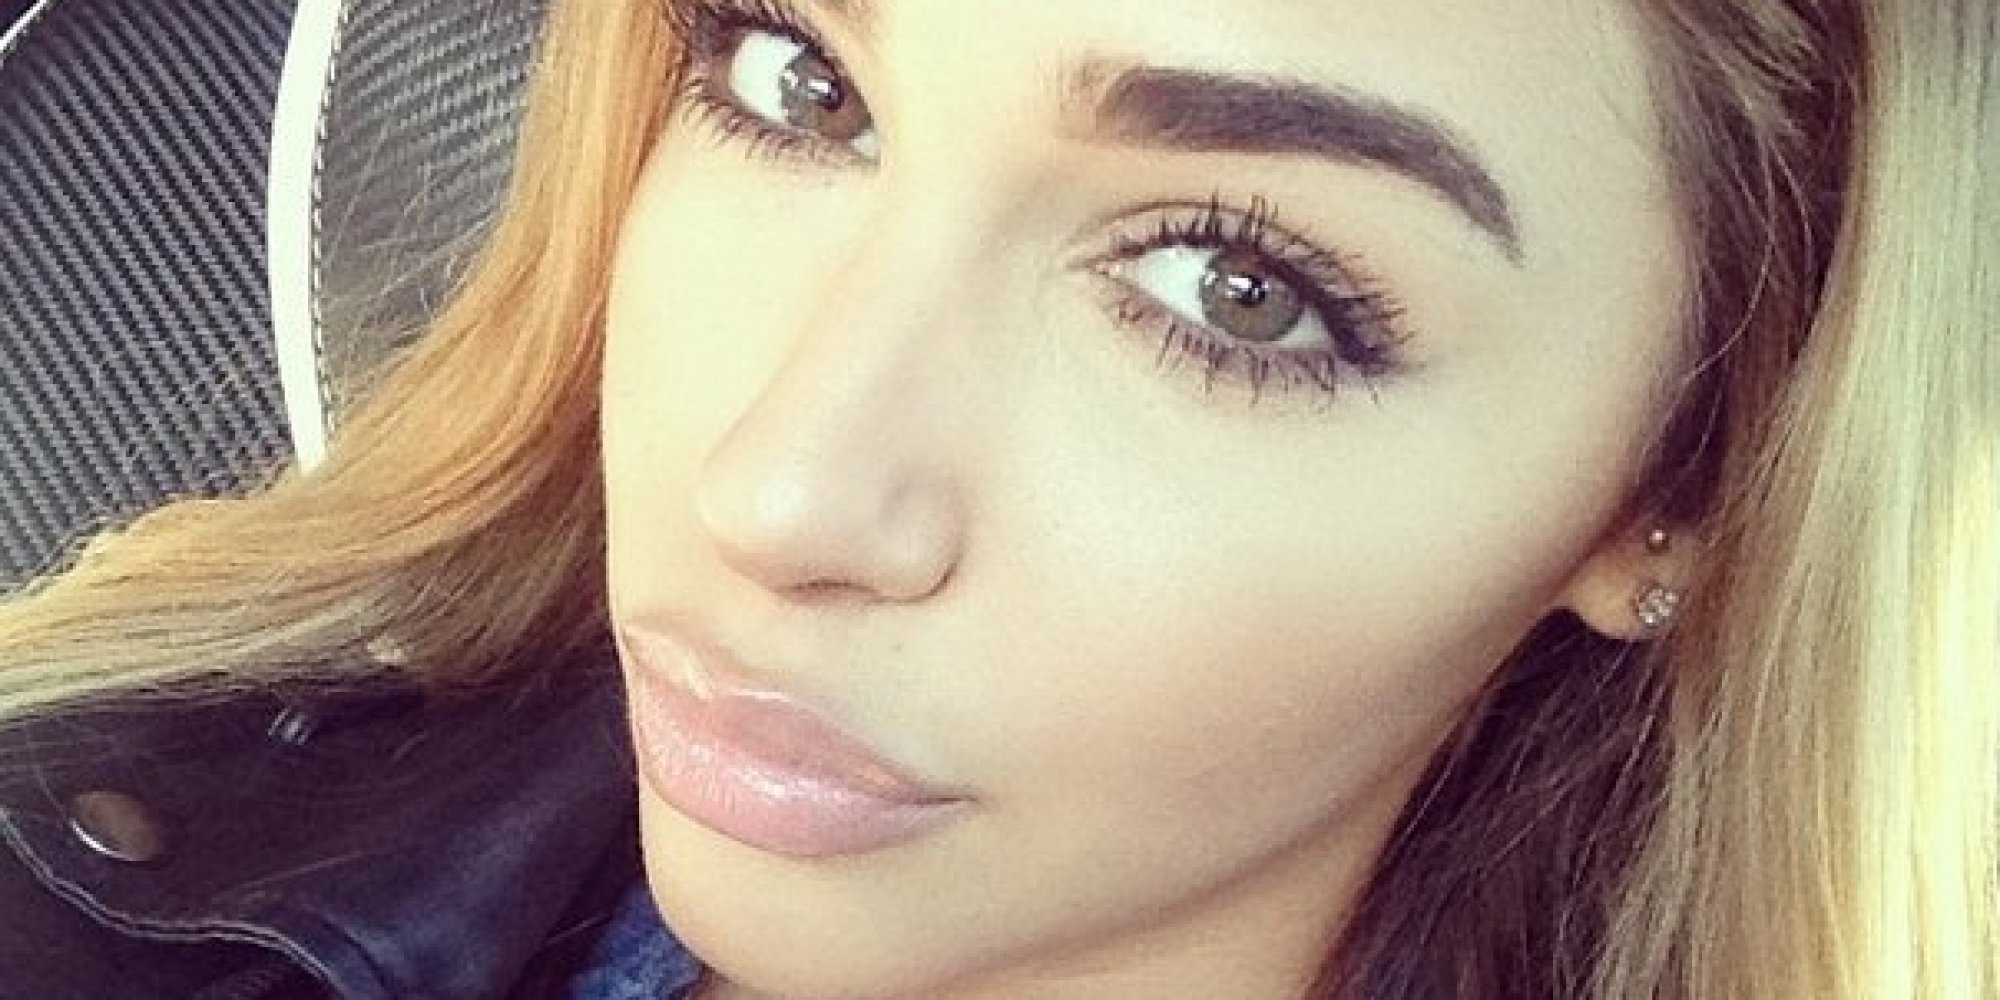 Model Chantel Jeffries Rides With Justin Bieber Before Arrest | HuffPost2000 x 1000